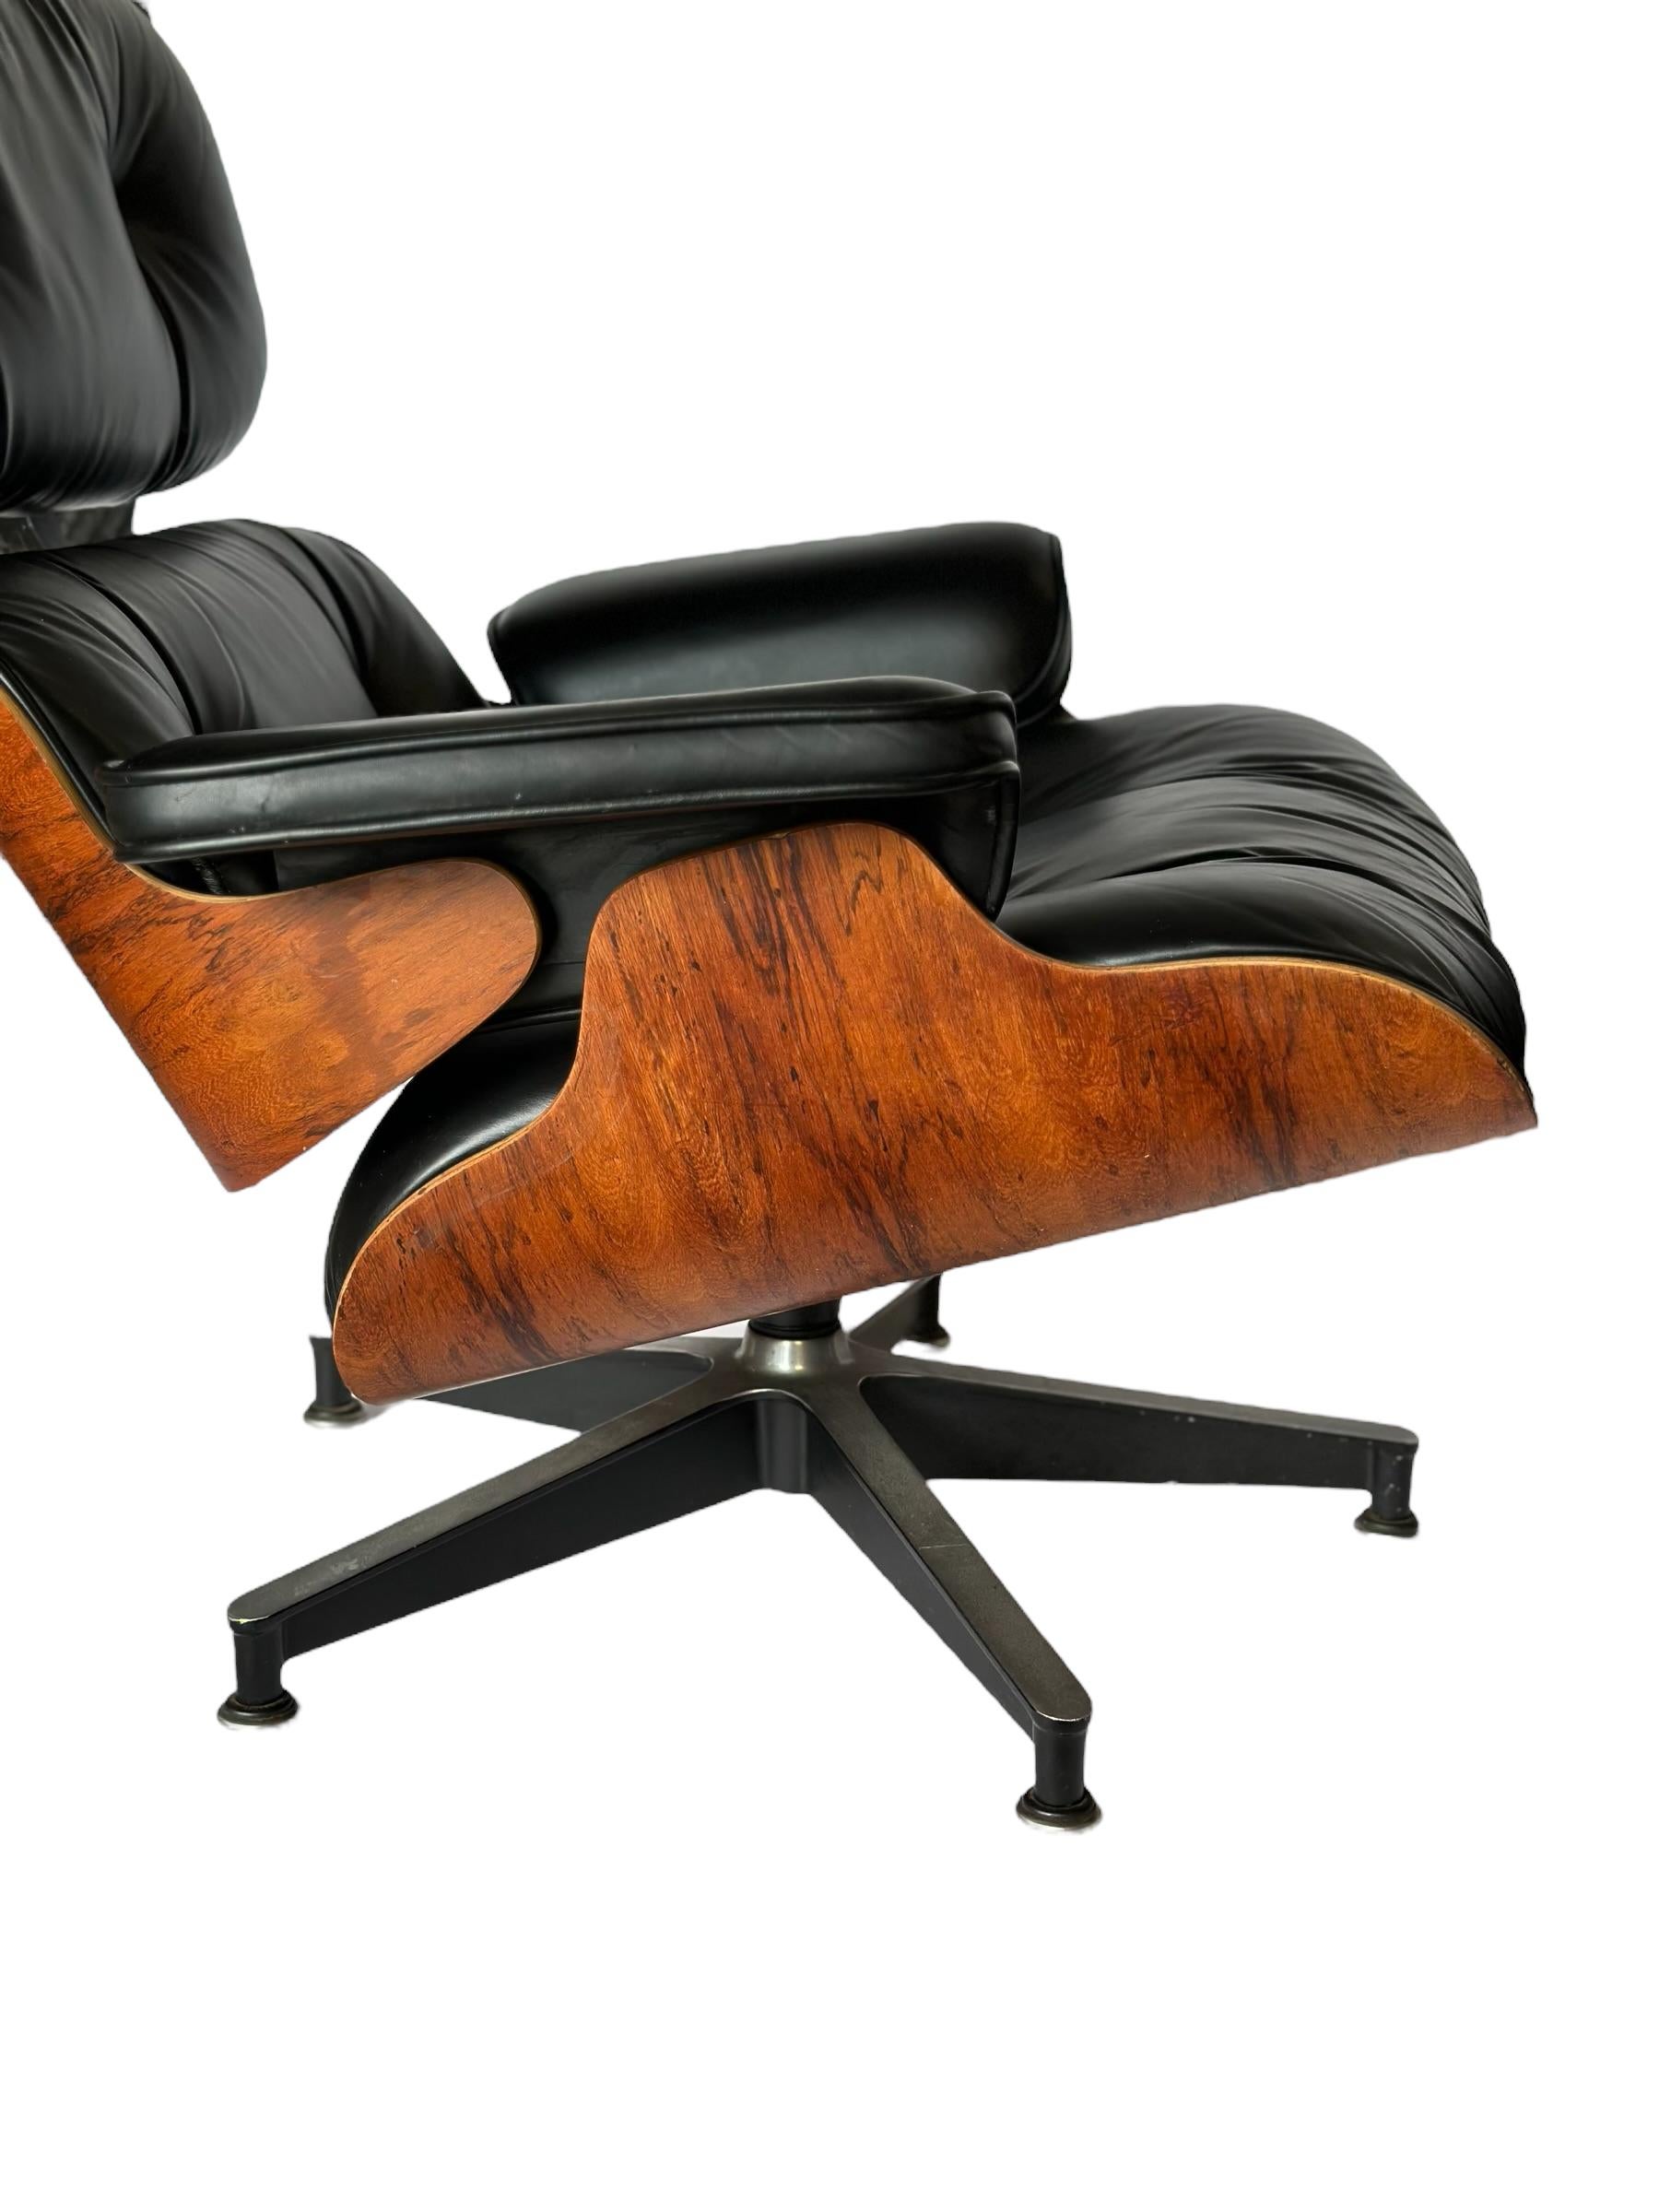 Restored Herman Miller Eames Lounge and Ottoman 1